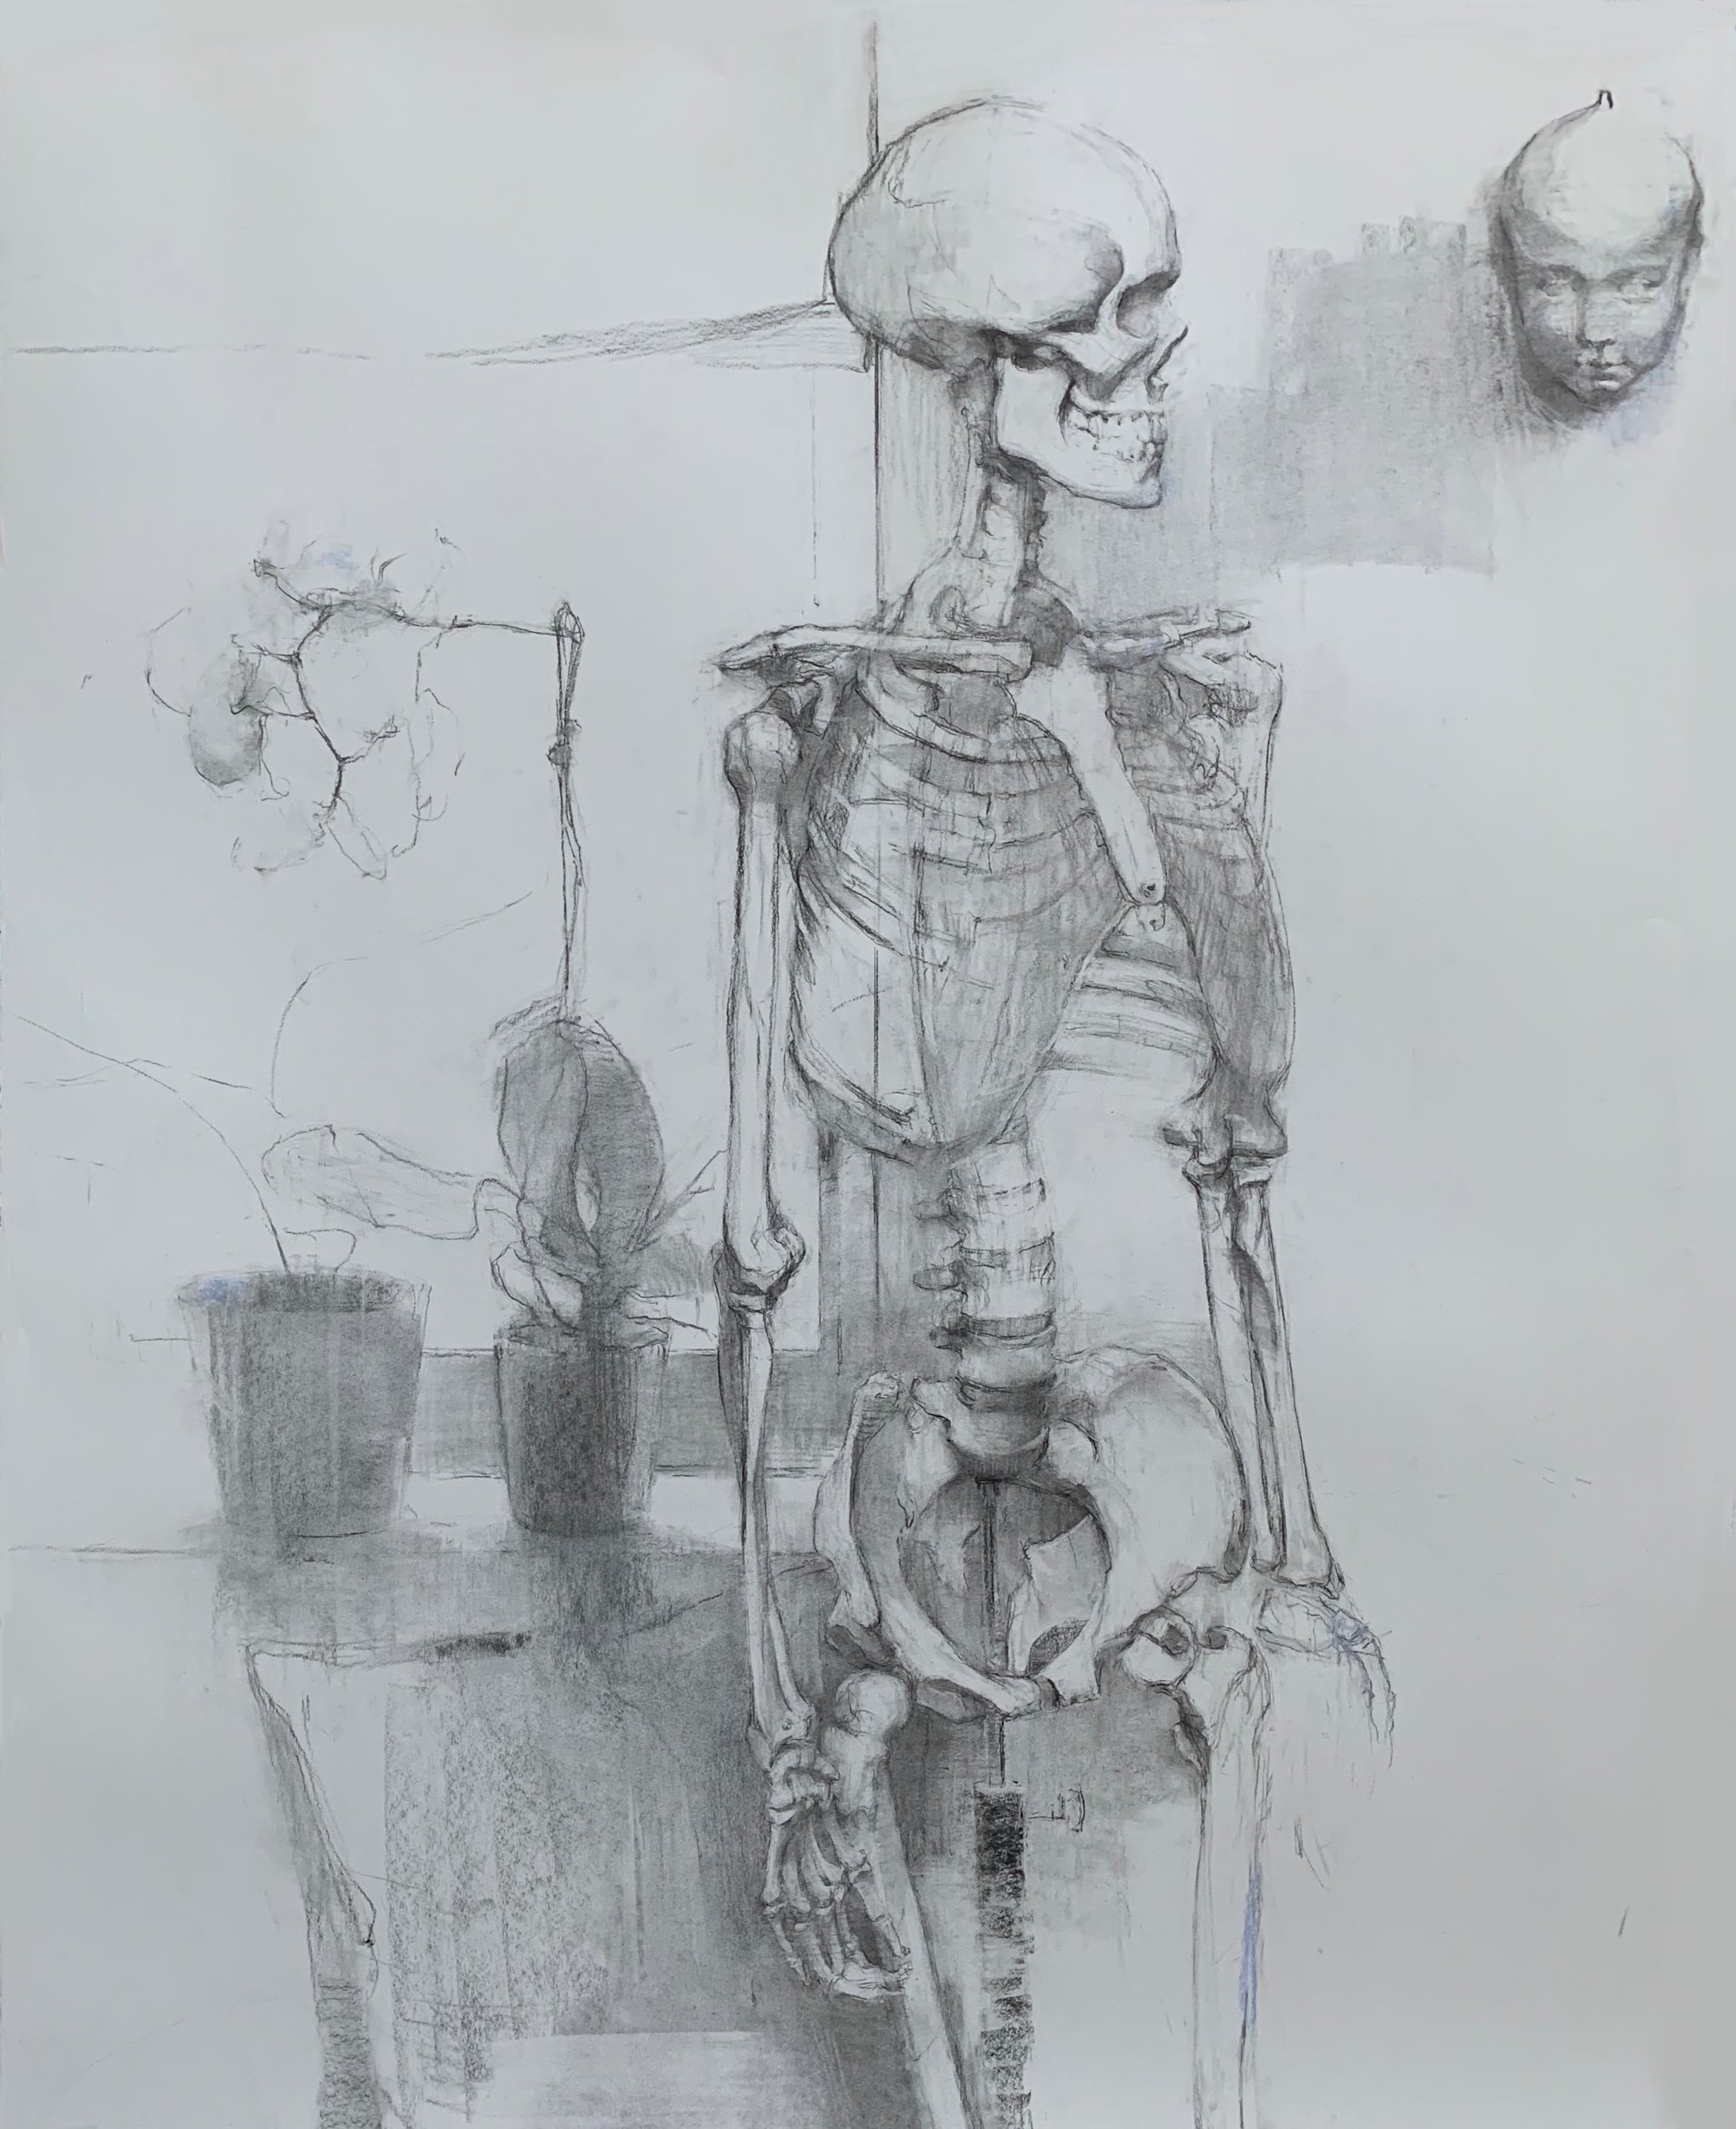   Skeleton 3   2021  48” x 38”  Charcoal and pastel on paper 